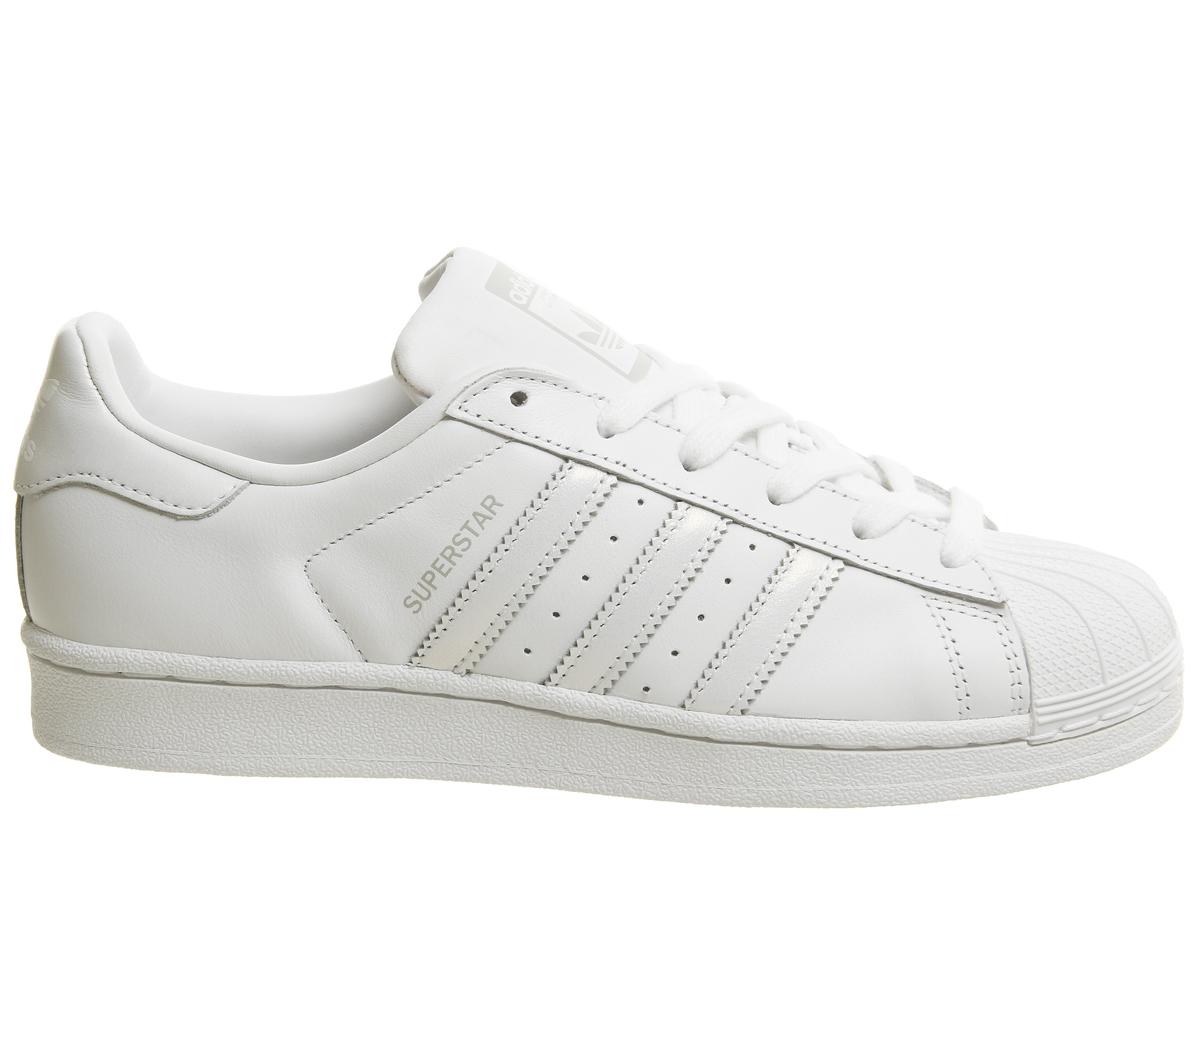 adidas Superstar 1 White Grey - Hers trainers